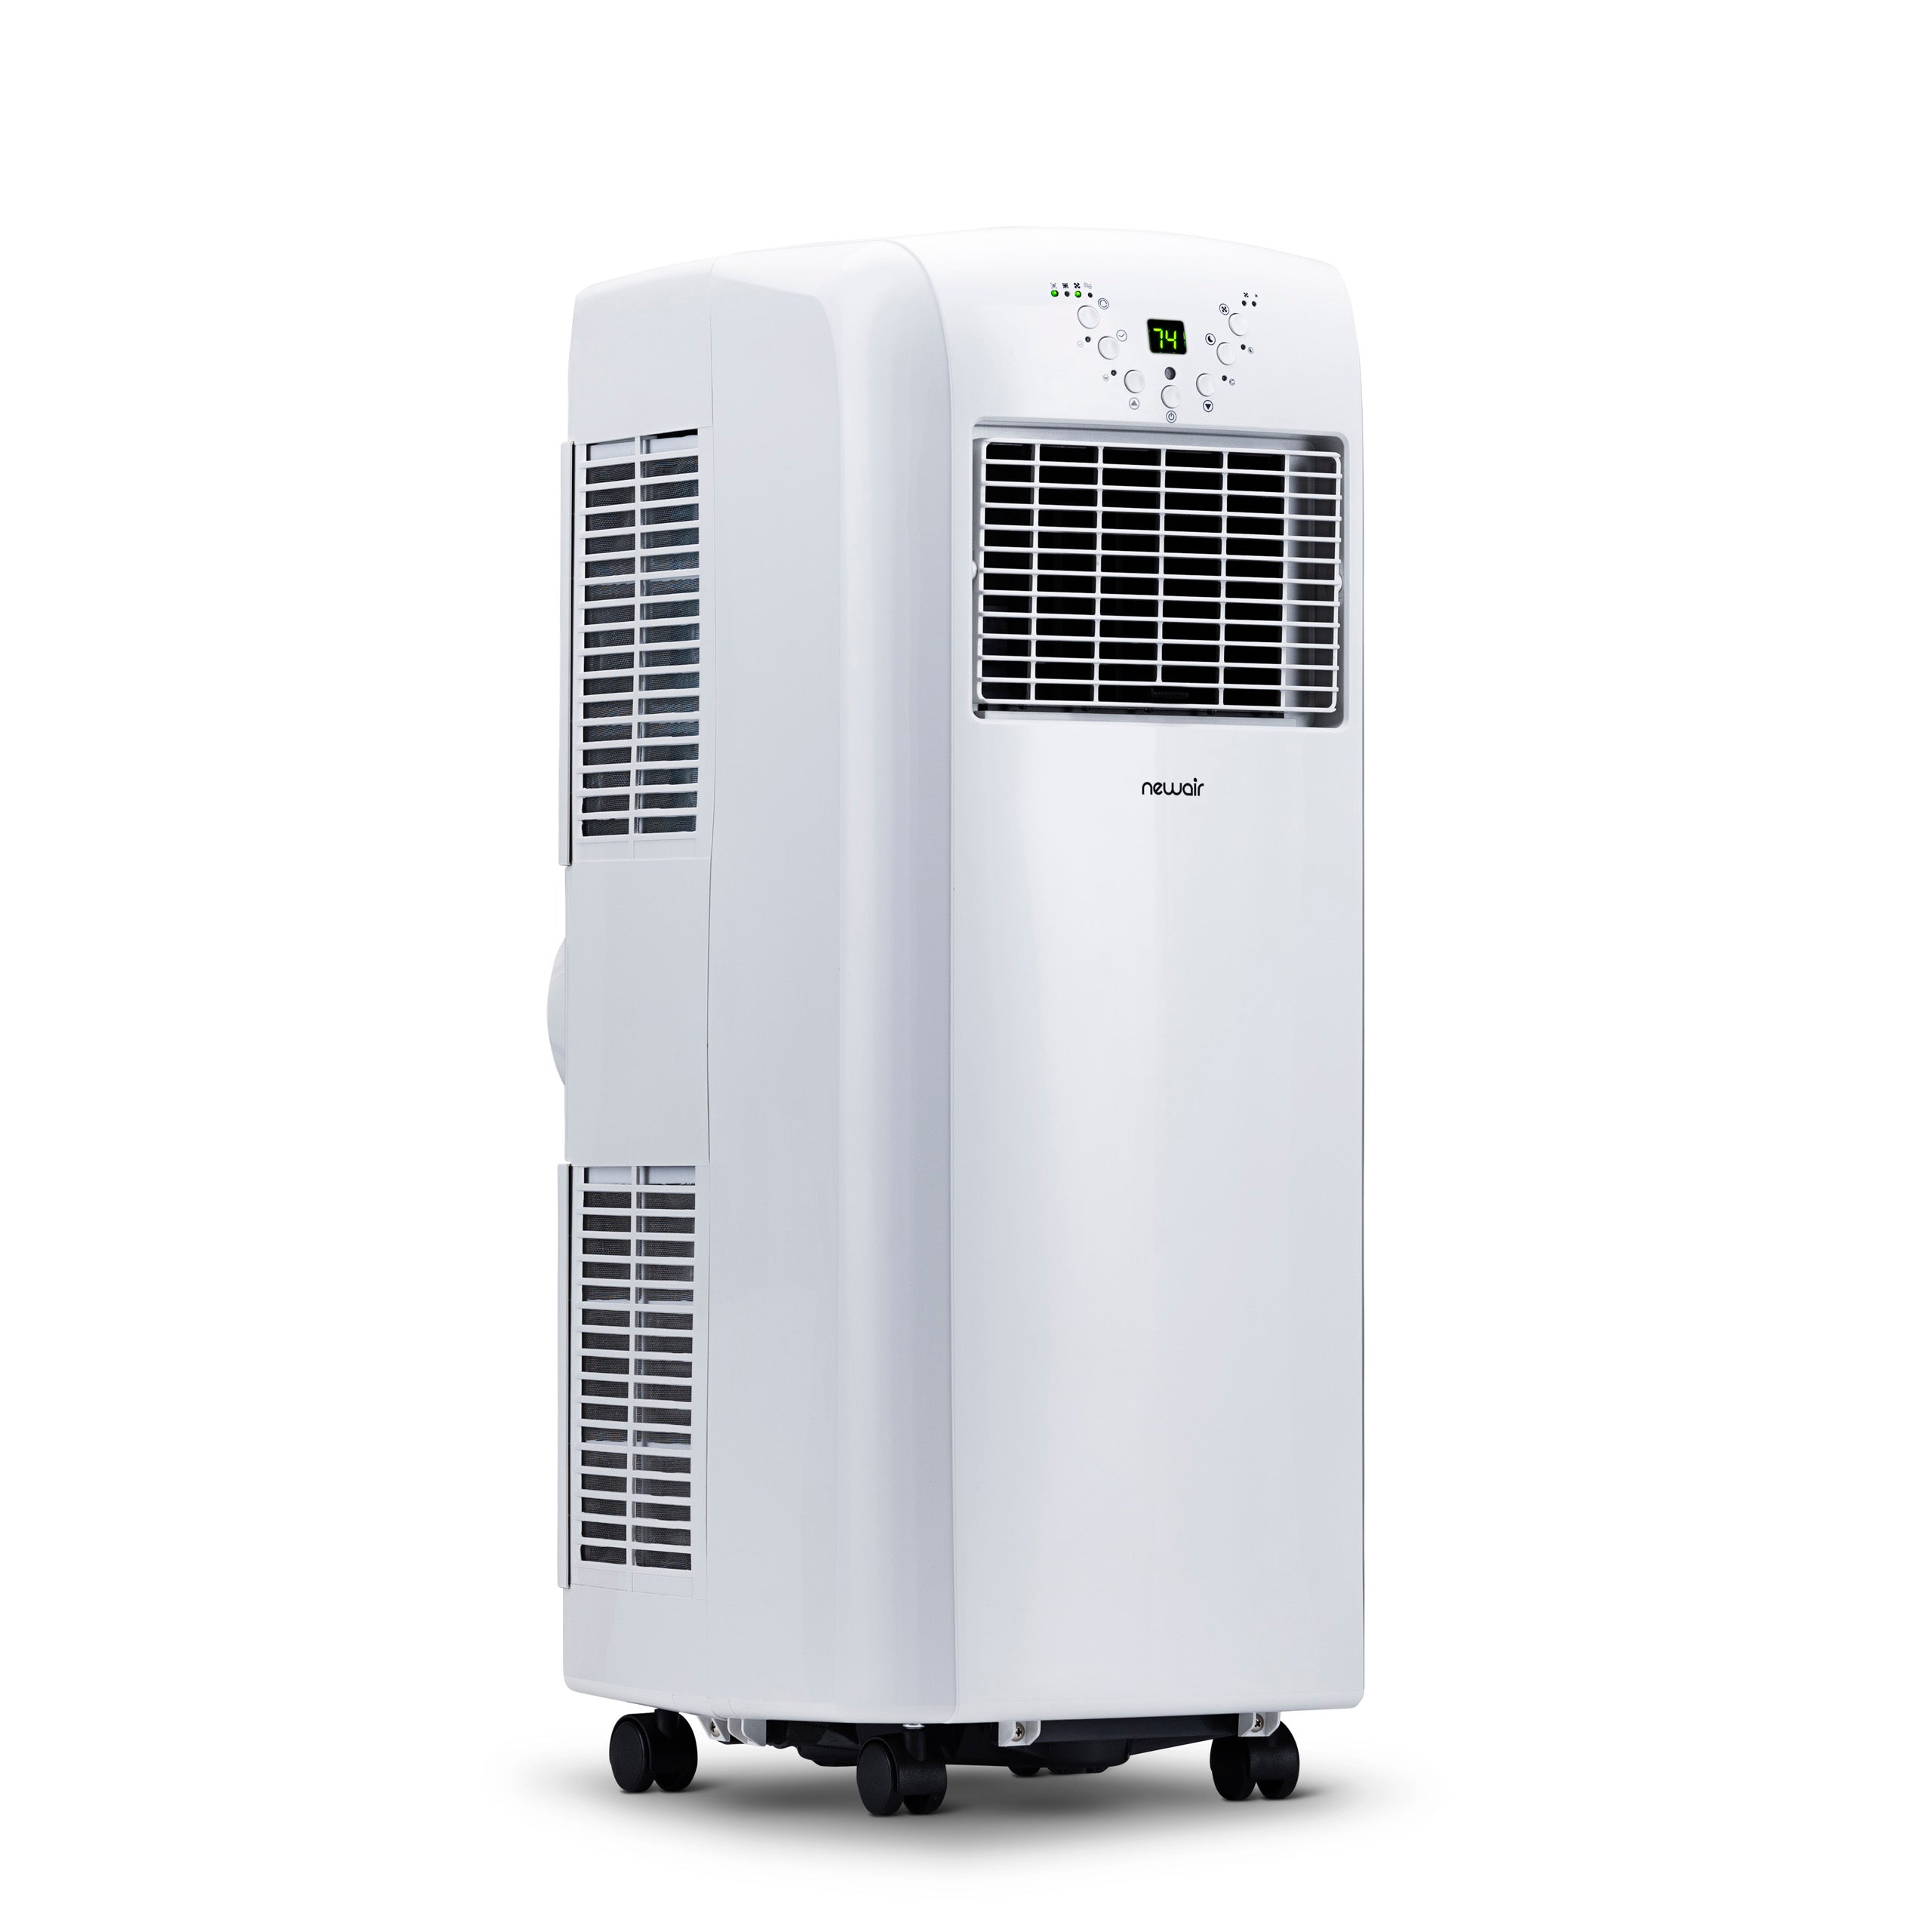 Are Portable Air Conditioners Worth The Cost The Pros And Cons Newair